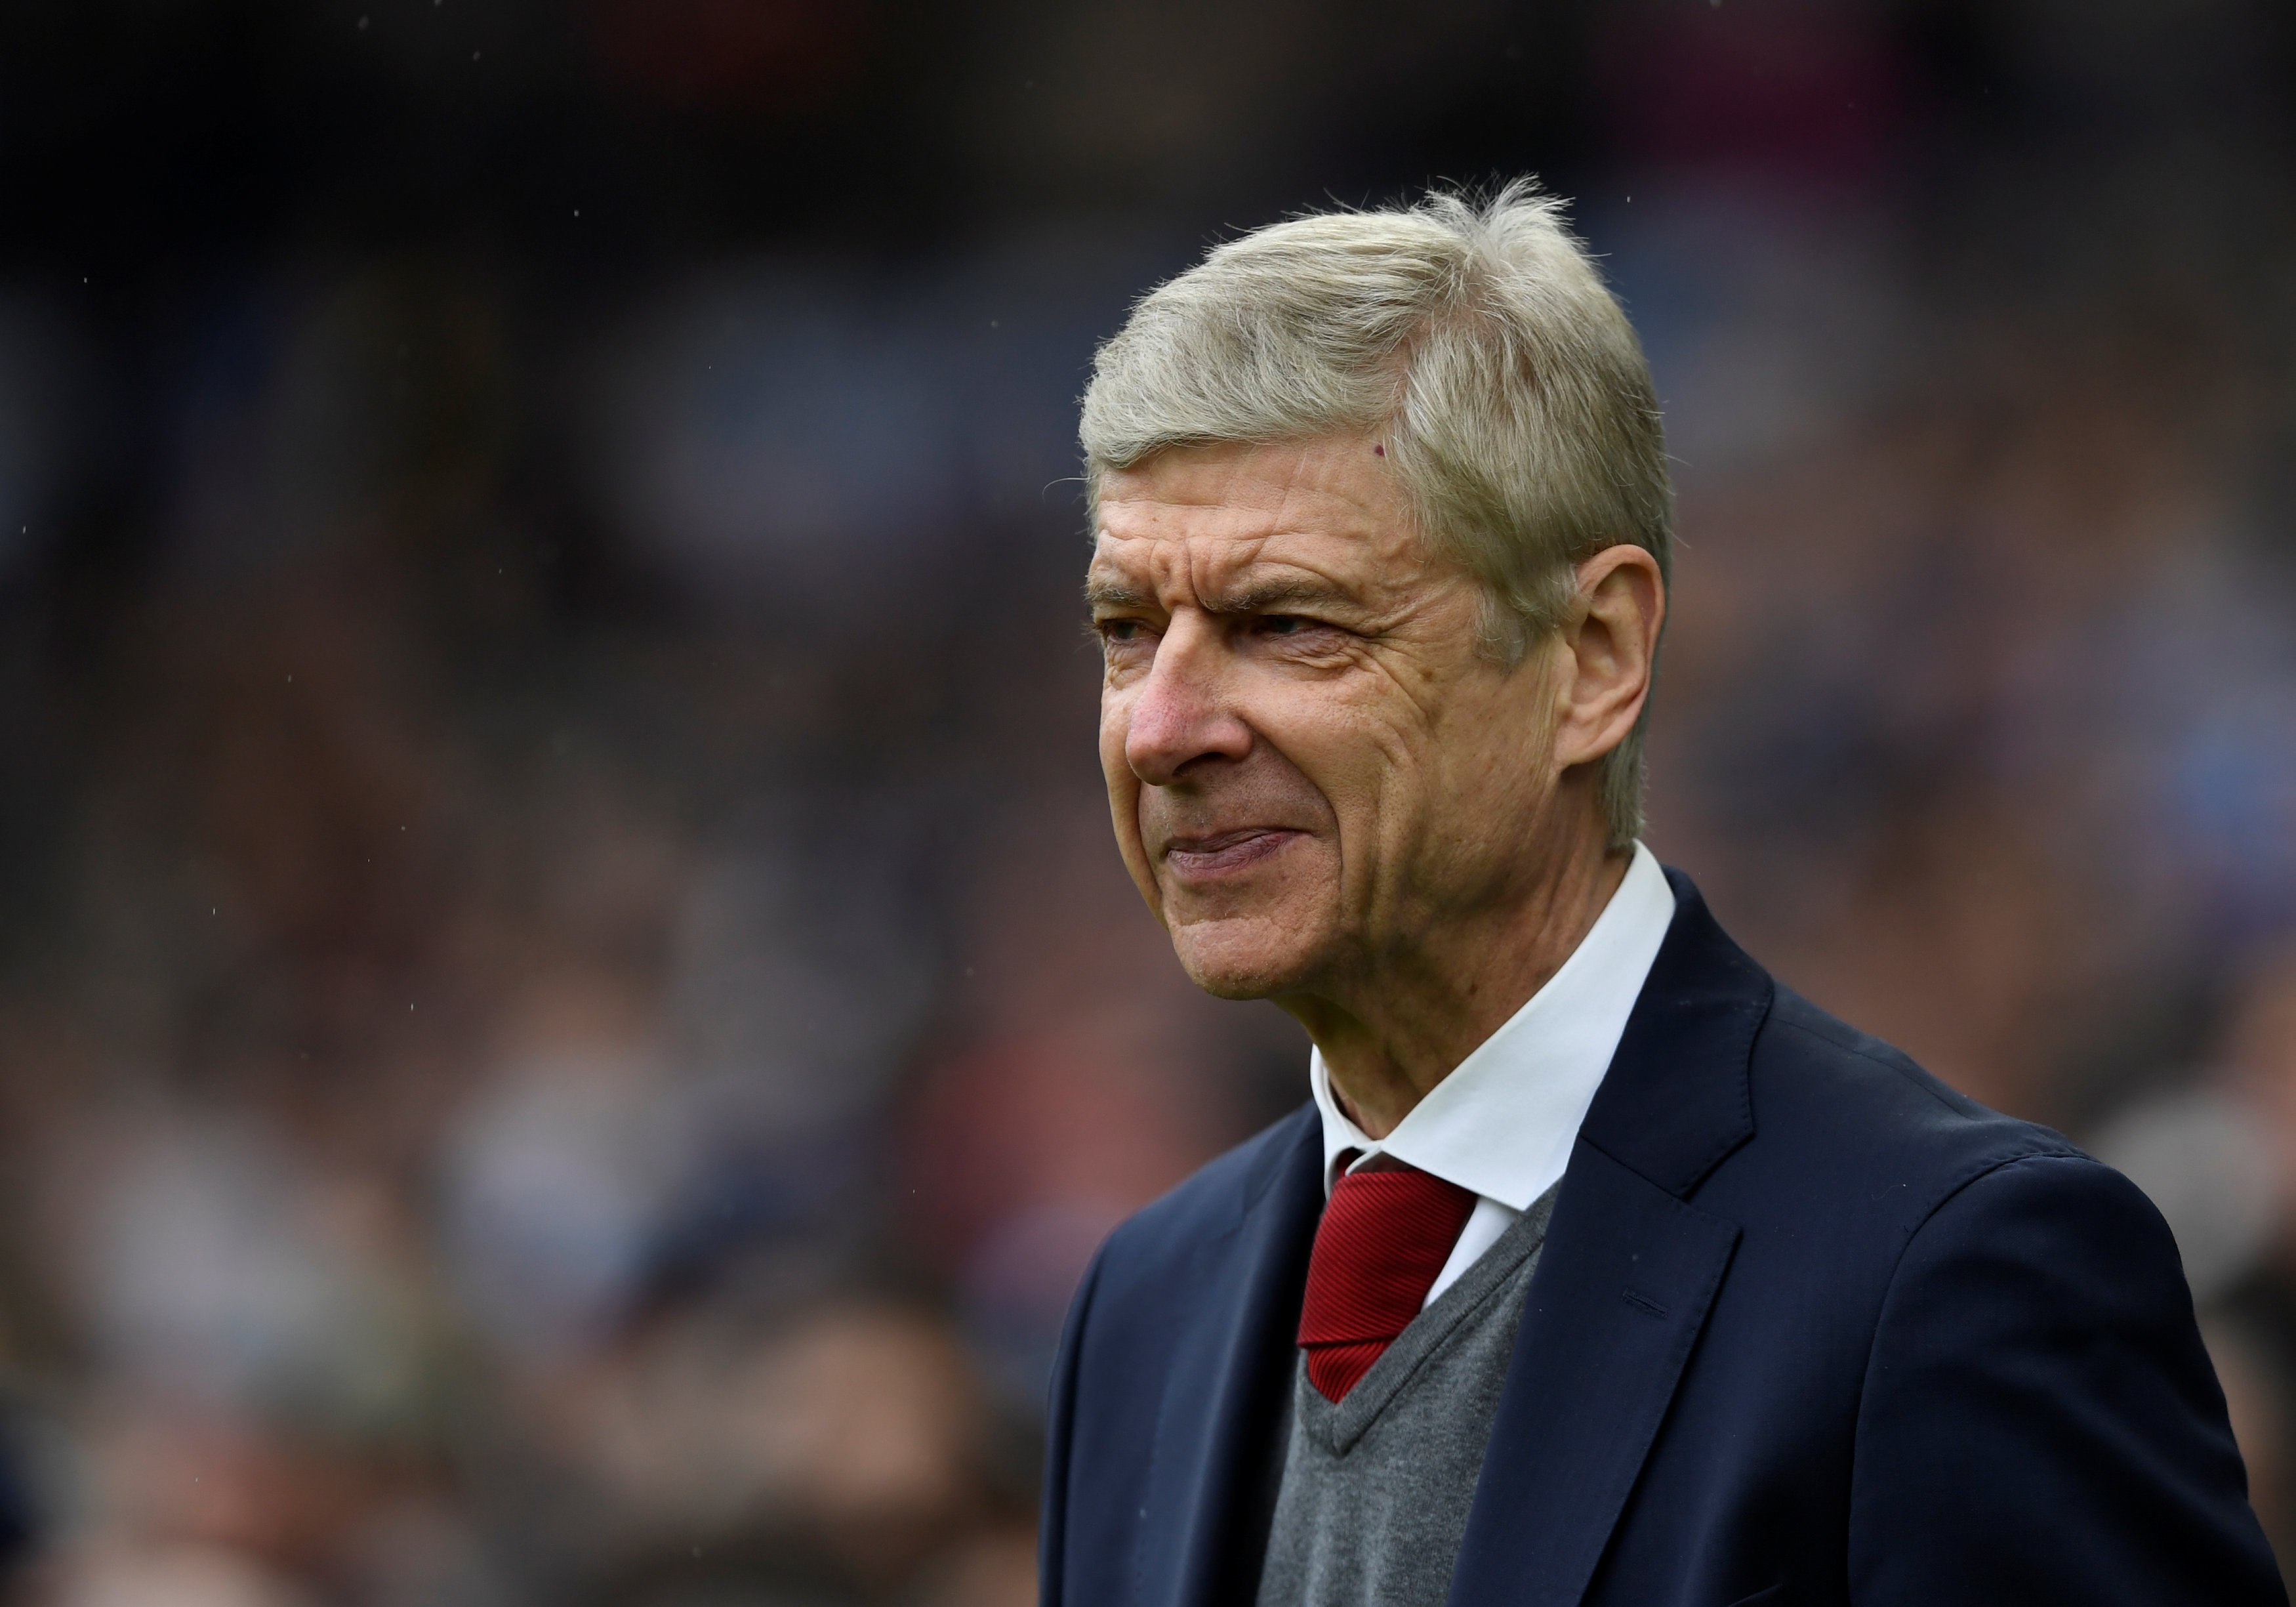 Arsenal in worse position than last year: Wenger